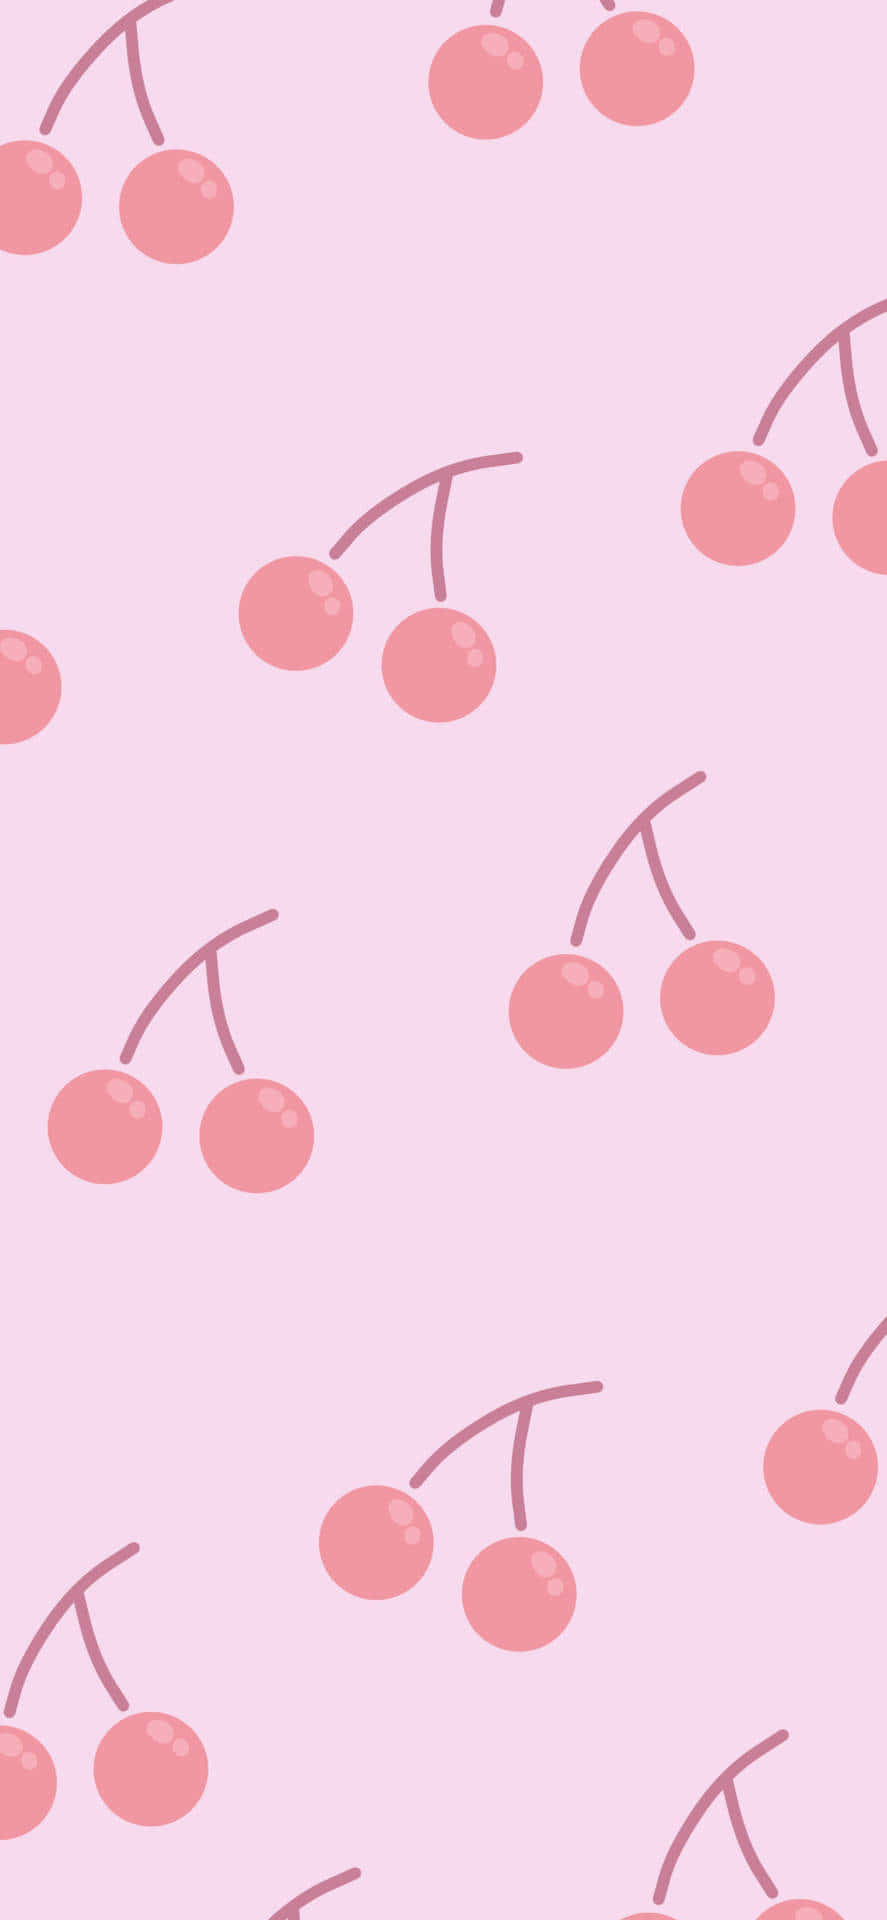 Round And Pink Cute Cherries Wallpaper